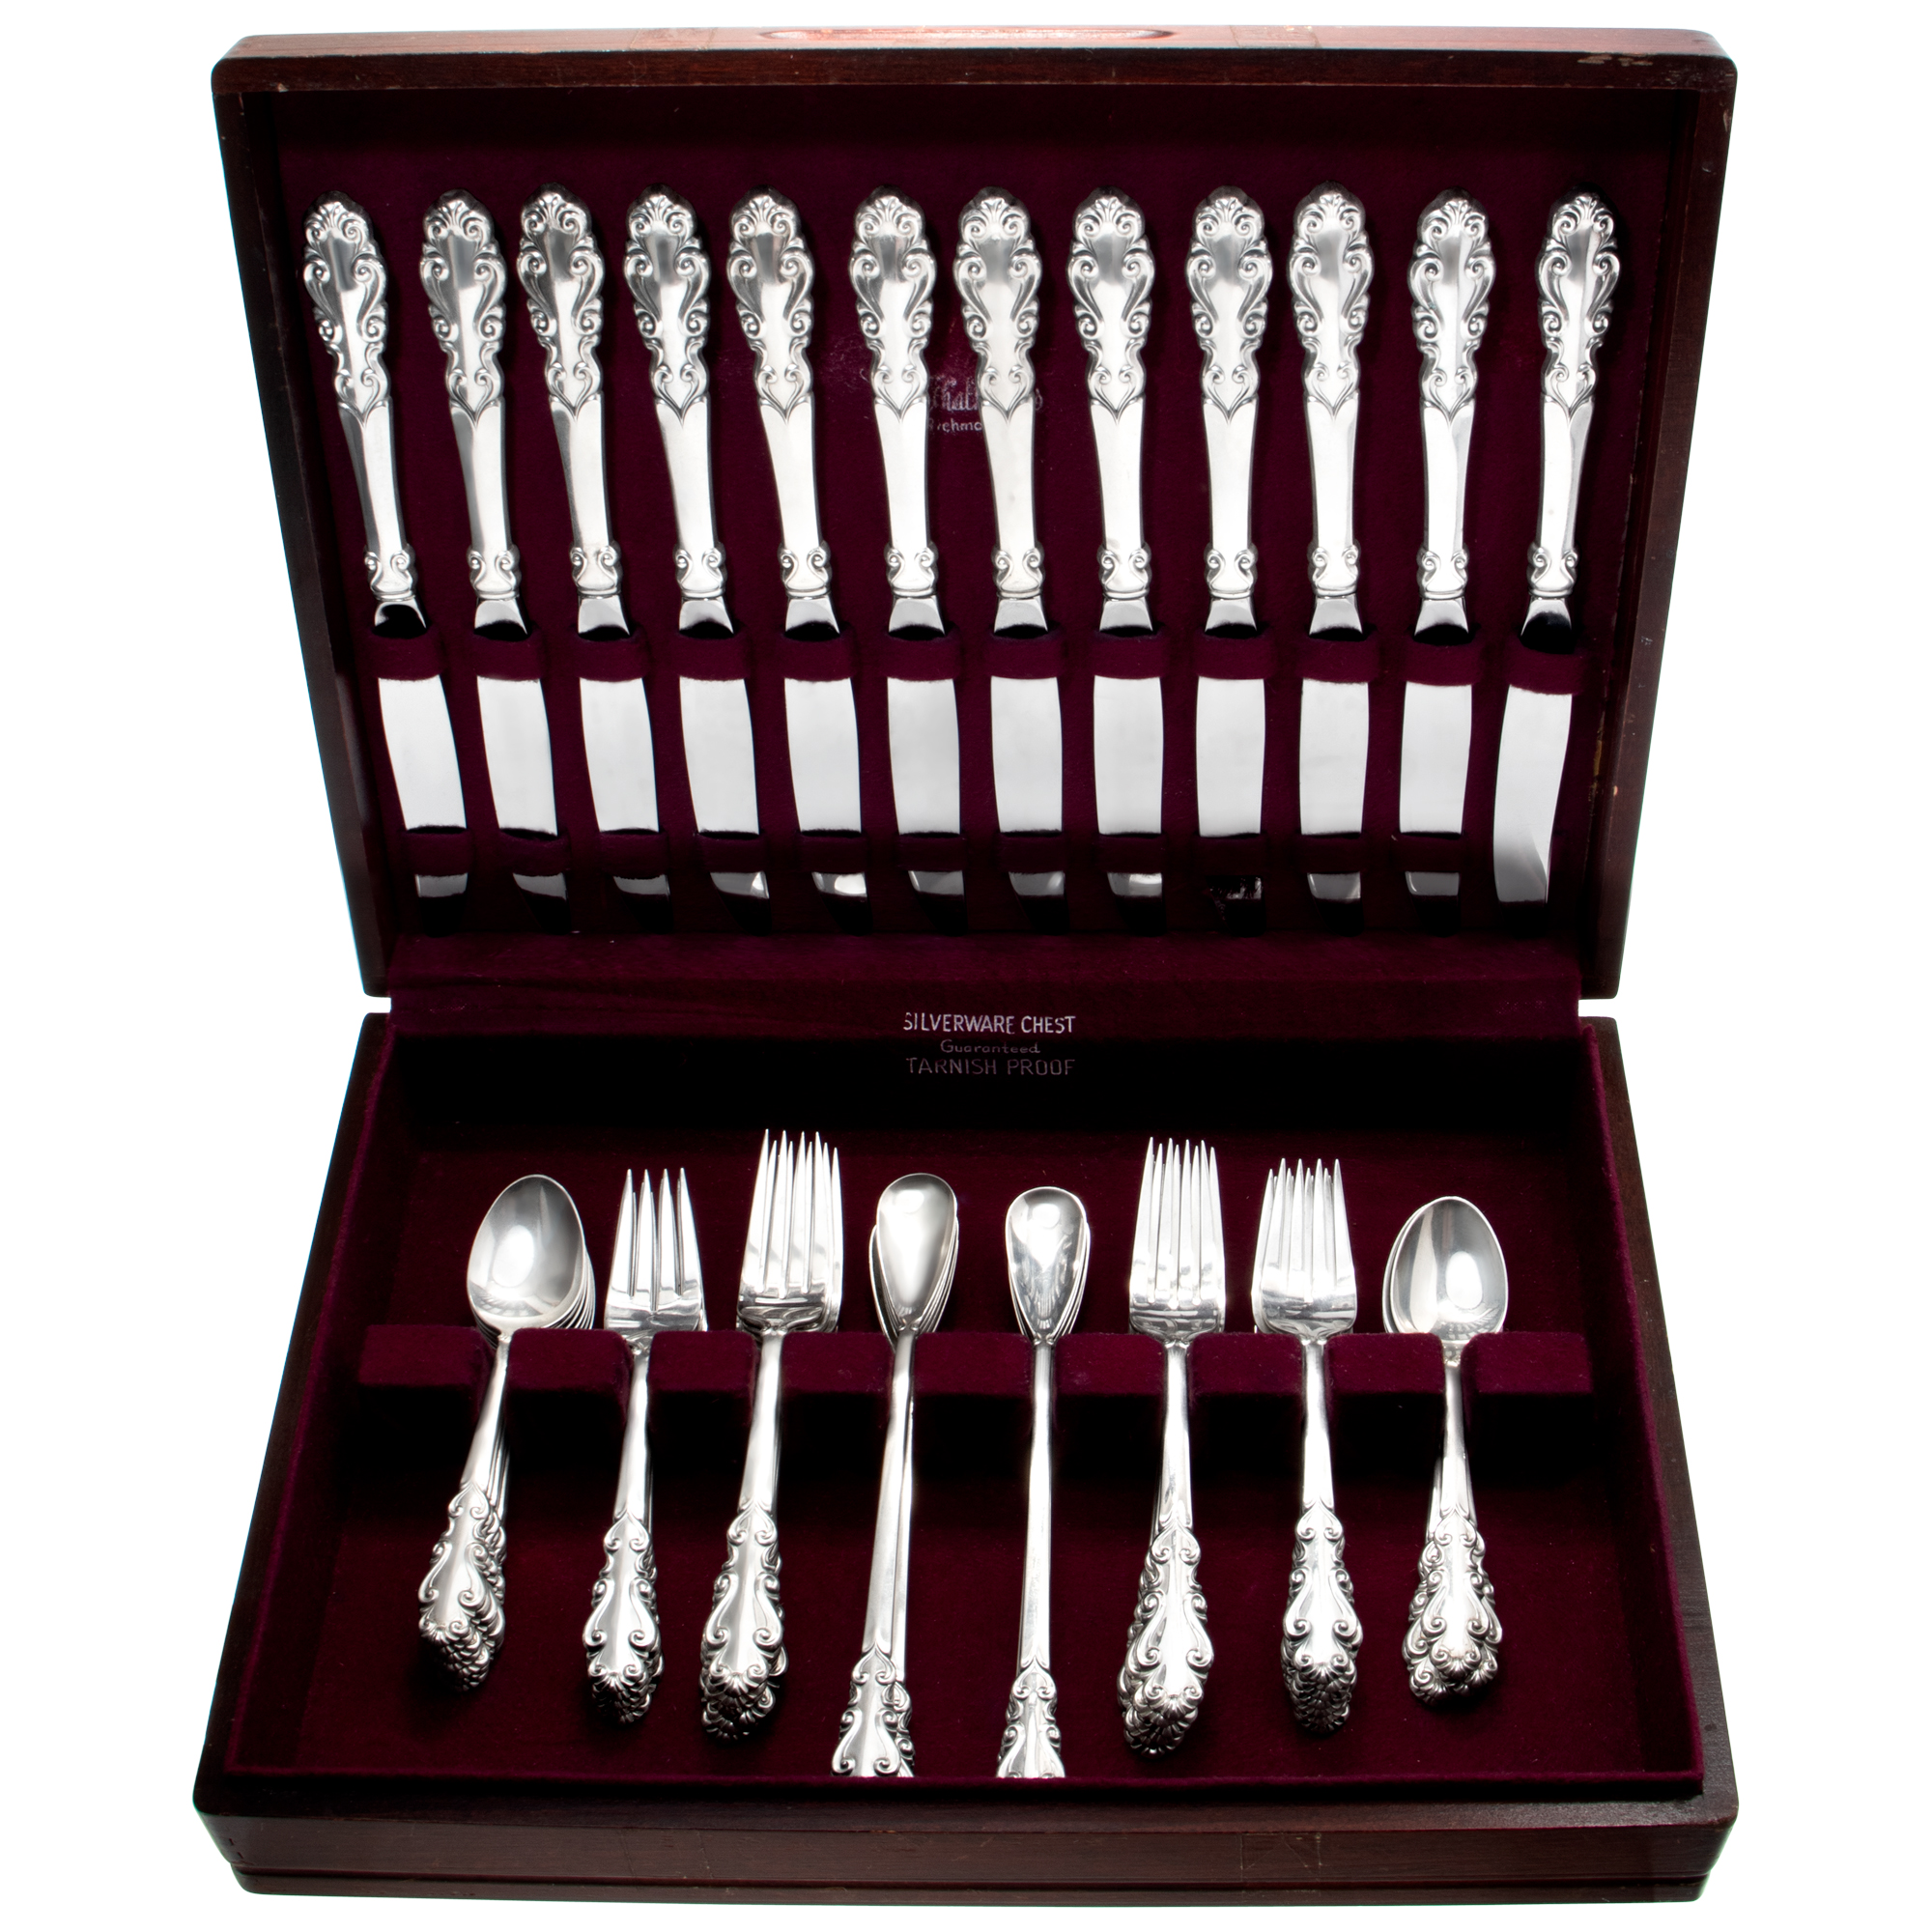 ESPLANADE Sterling silver flatware set patented in 1952 by Towle Silversmiths. 5 place settings for 12-. Over 66 troy ounce sterling silver.